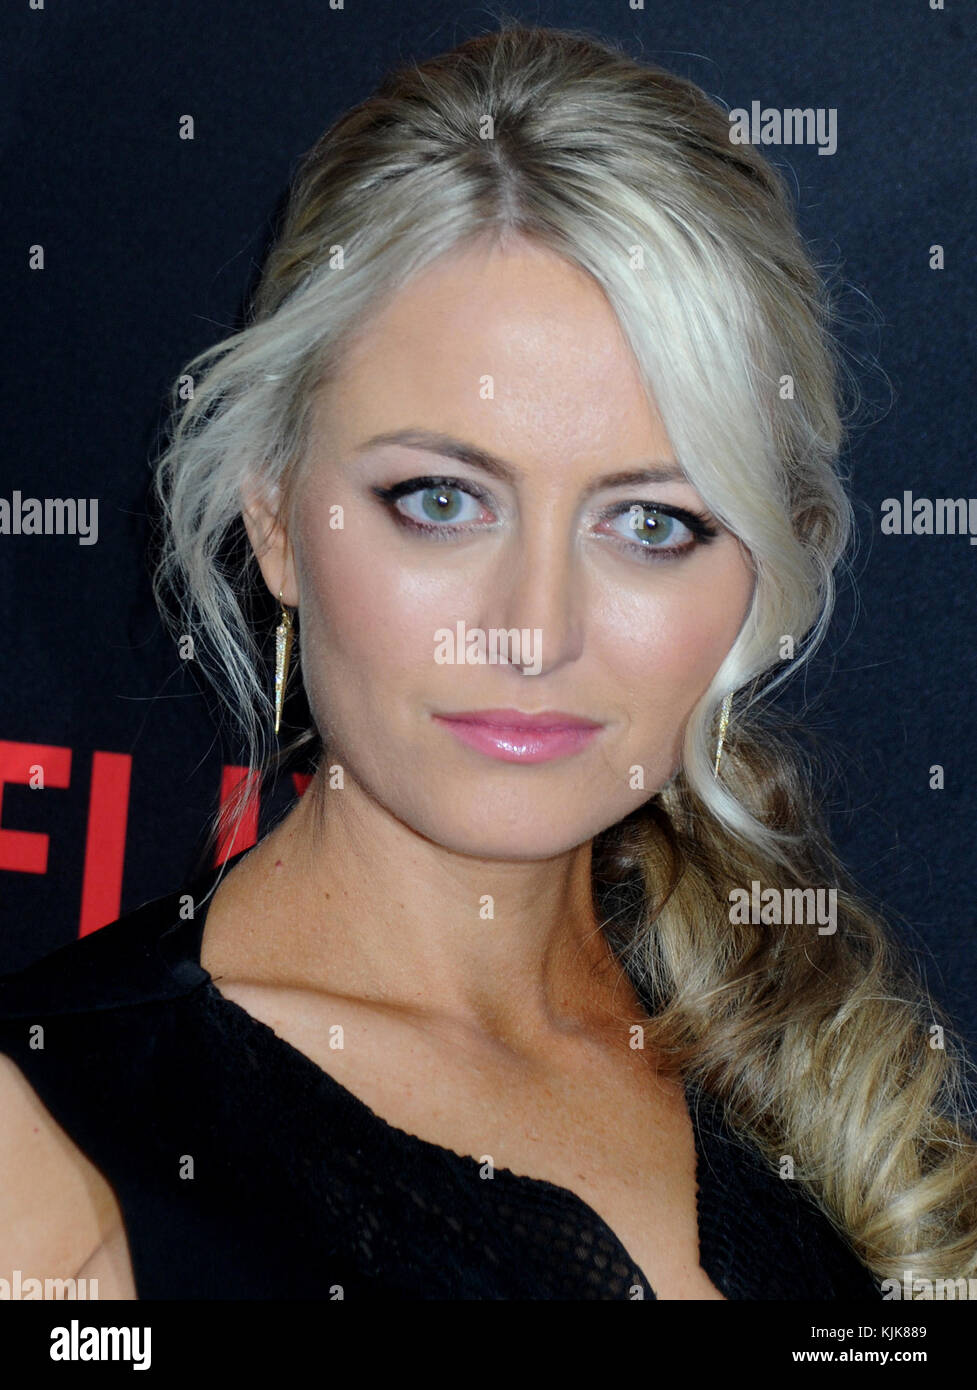 NEW YORK, NY - MARCH 10: Amy Rutberg attends the 'Daredevil' season 2 premiere at AMC Loews Lincoln Square 13 theater on March 10, 2016 in New York City.   People:  Amy Rutberg Stock Photo